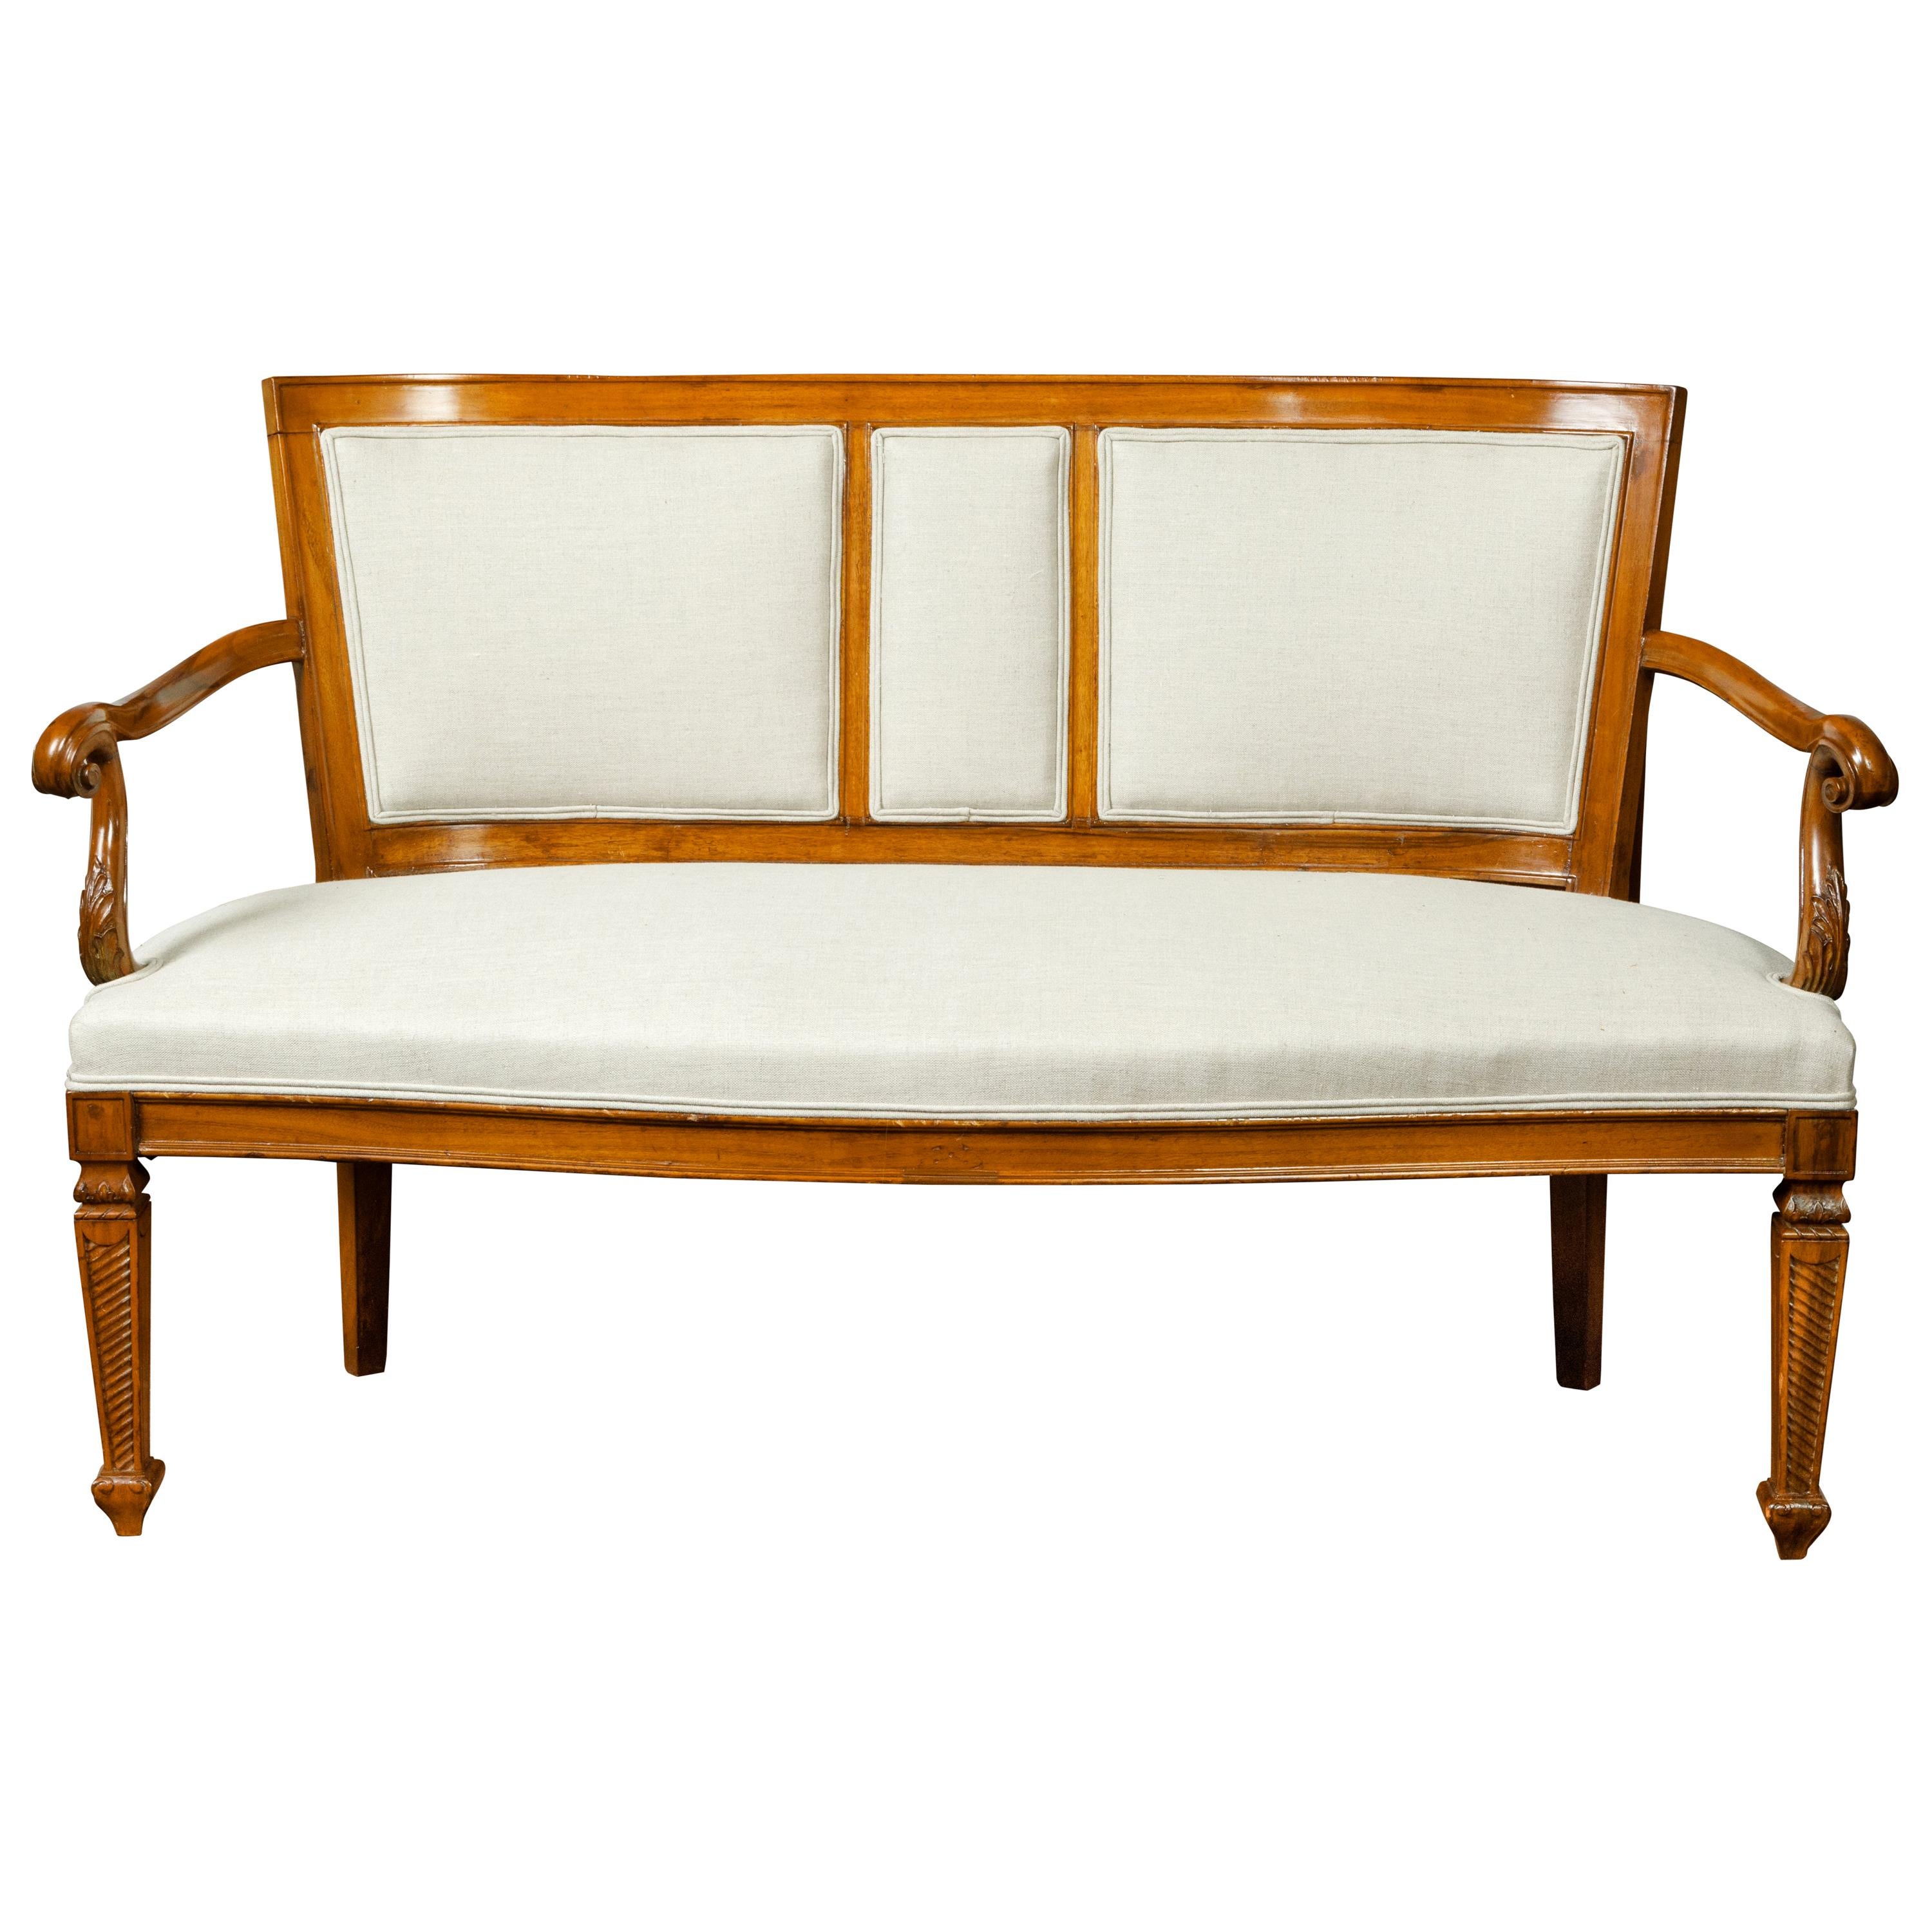 Italian 19th Century Carved Walnut Upholstered Settee with Scrolling Arms For Sale